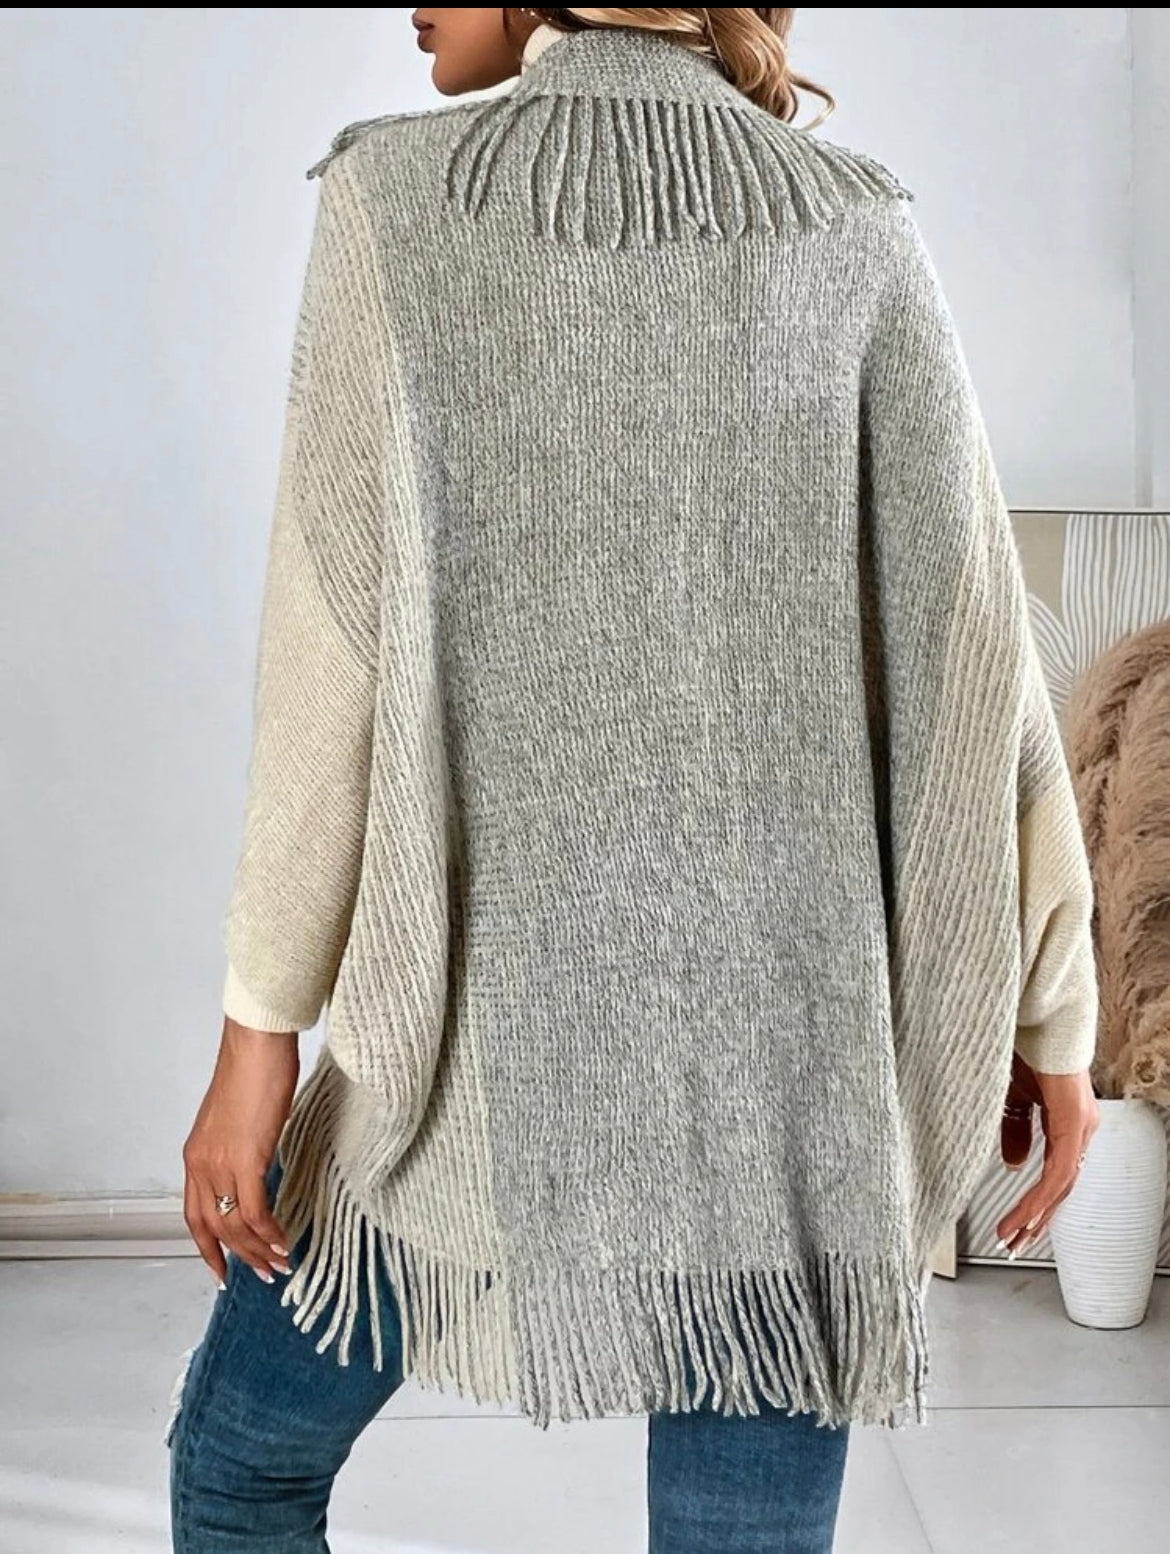 Winter White and Grey Cardigan